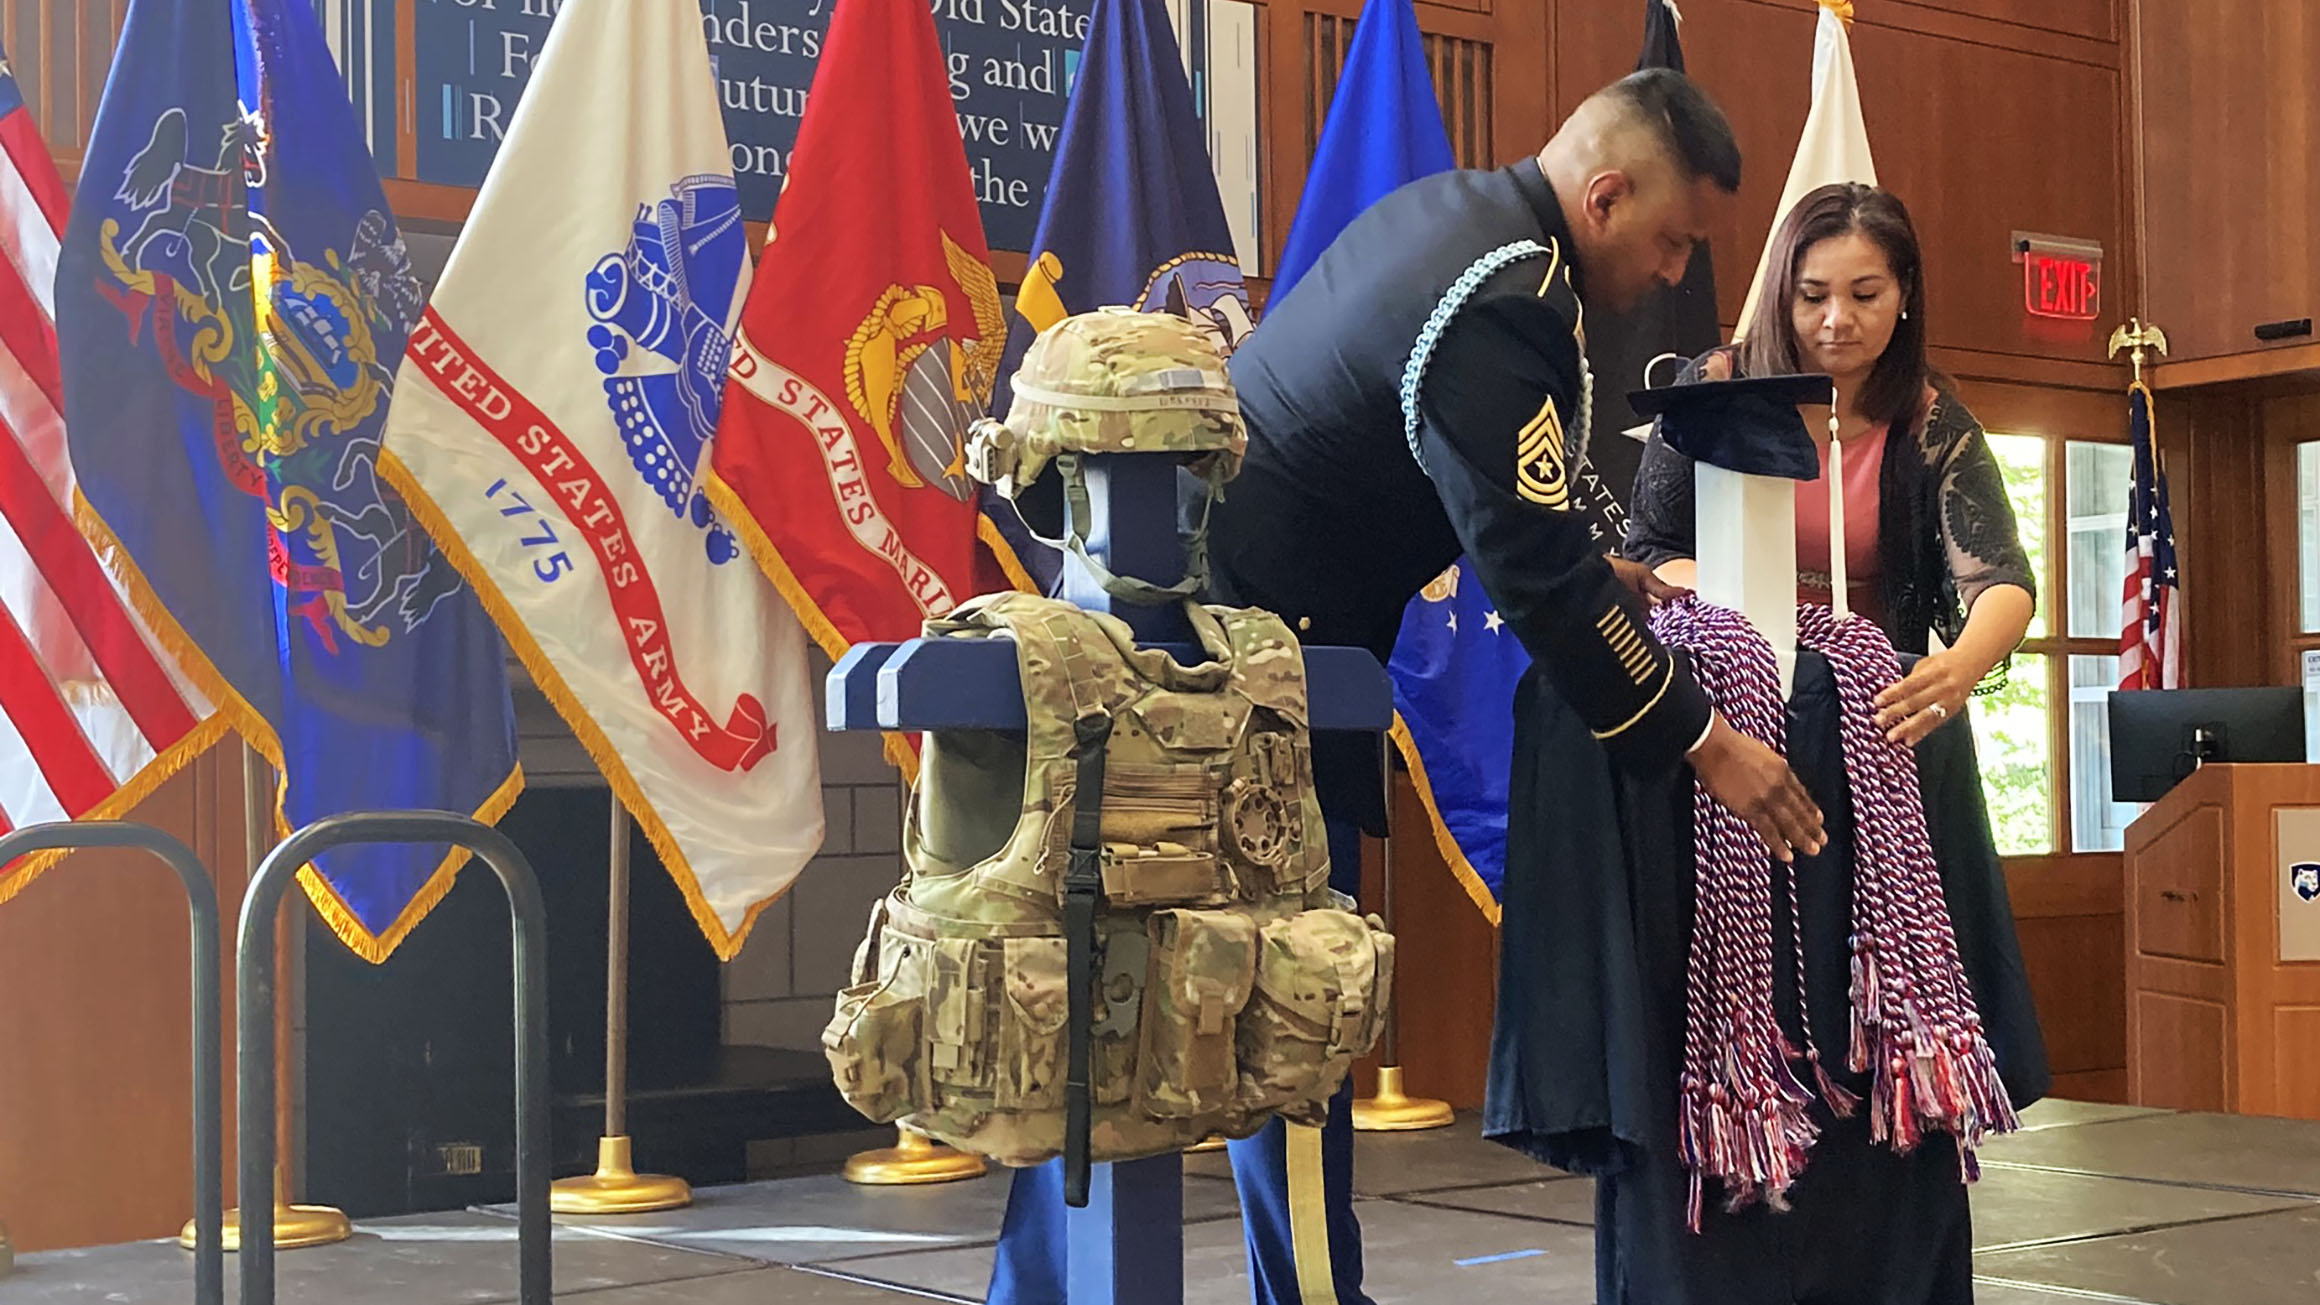 A man and a woman place the honor cords around the neck of a dummy wearing a graduation gown on a stage with flags of the service academies in the background